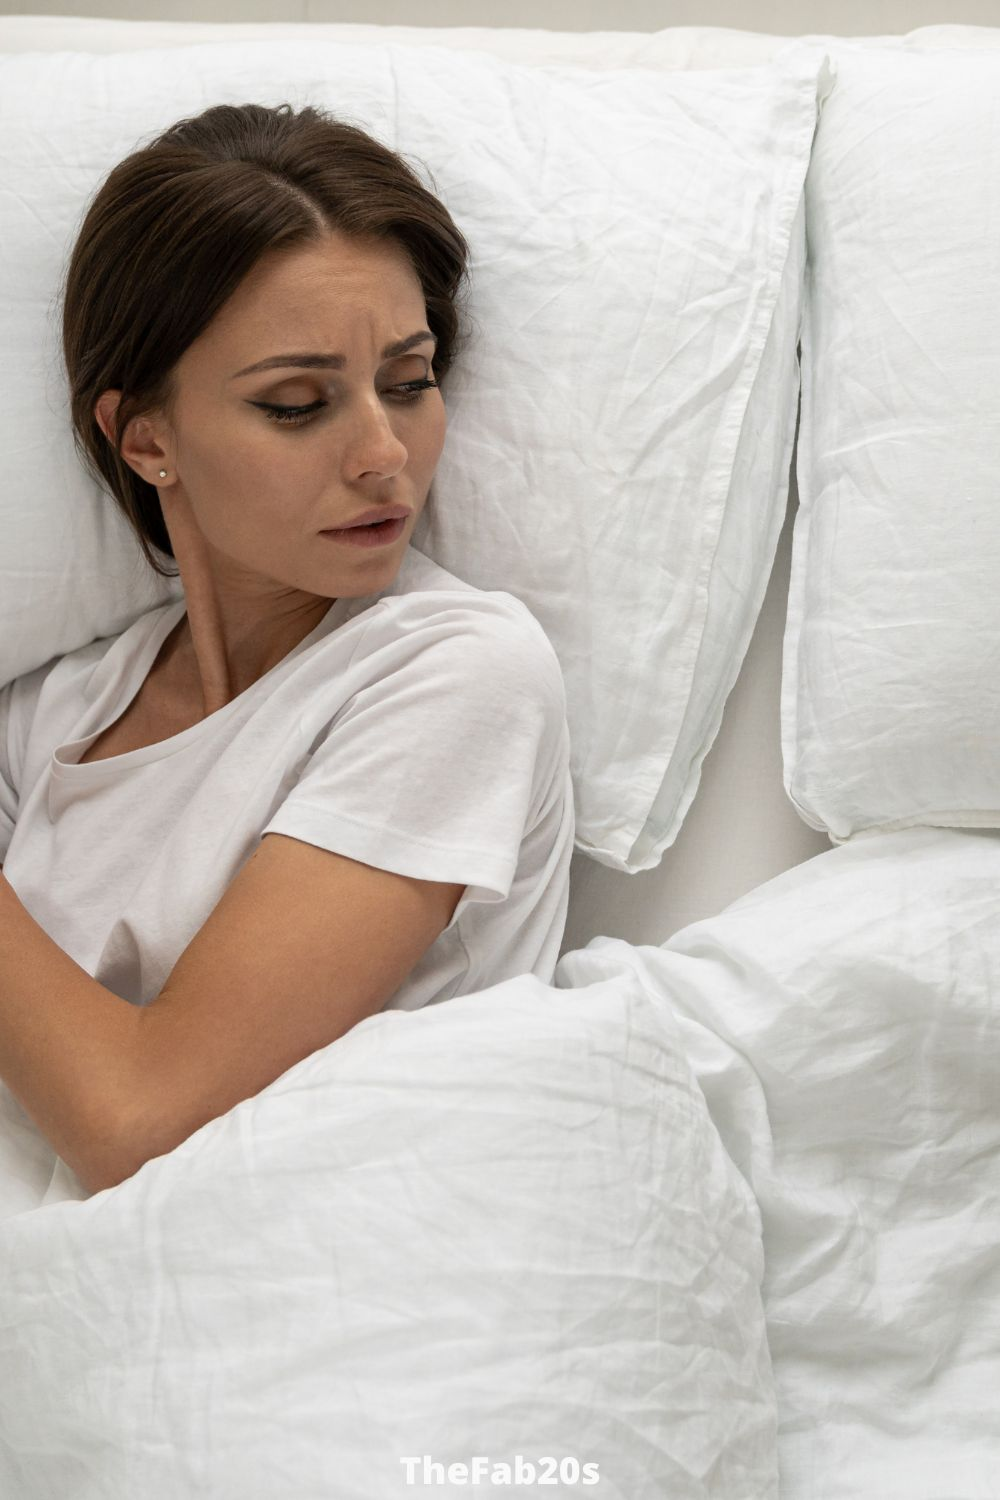 Woman alone in bed, looking to the empty pillow next to her - Featured in Signs He Only Wants You For Your Body